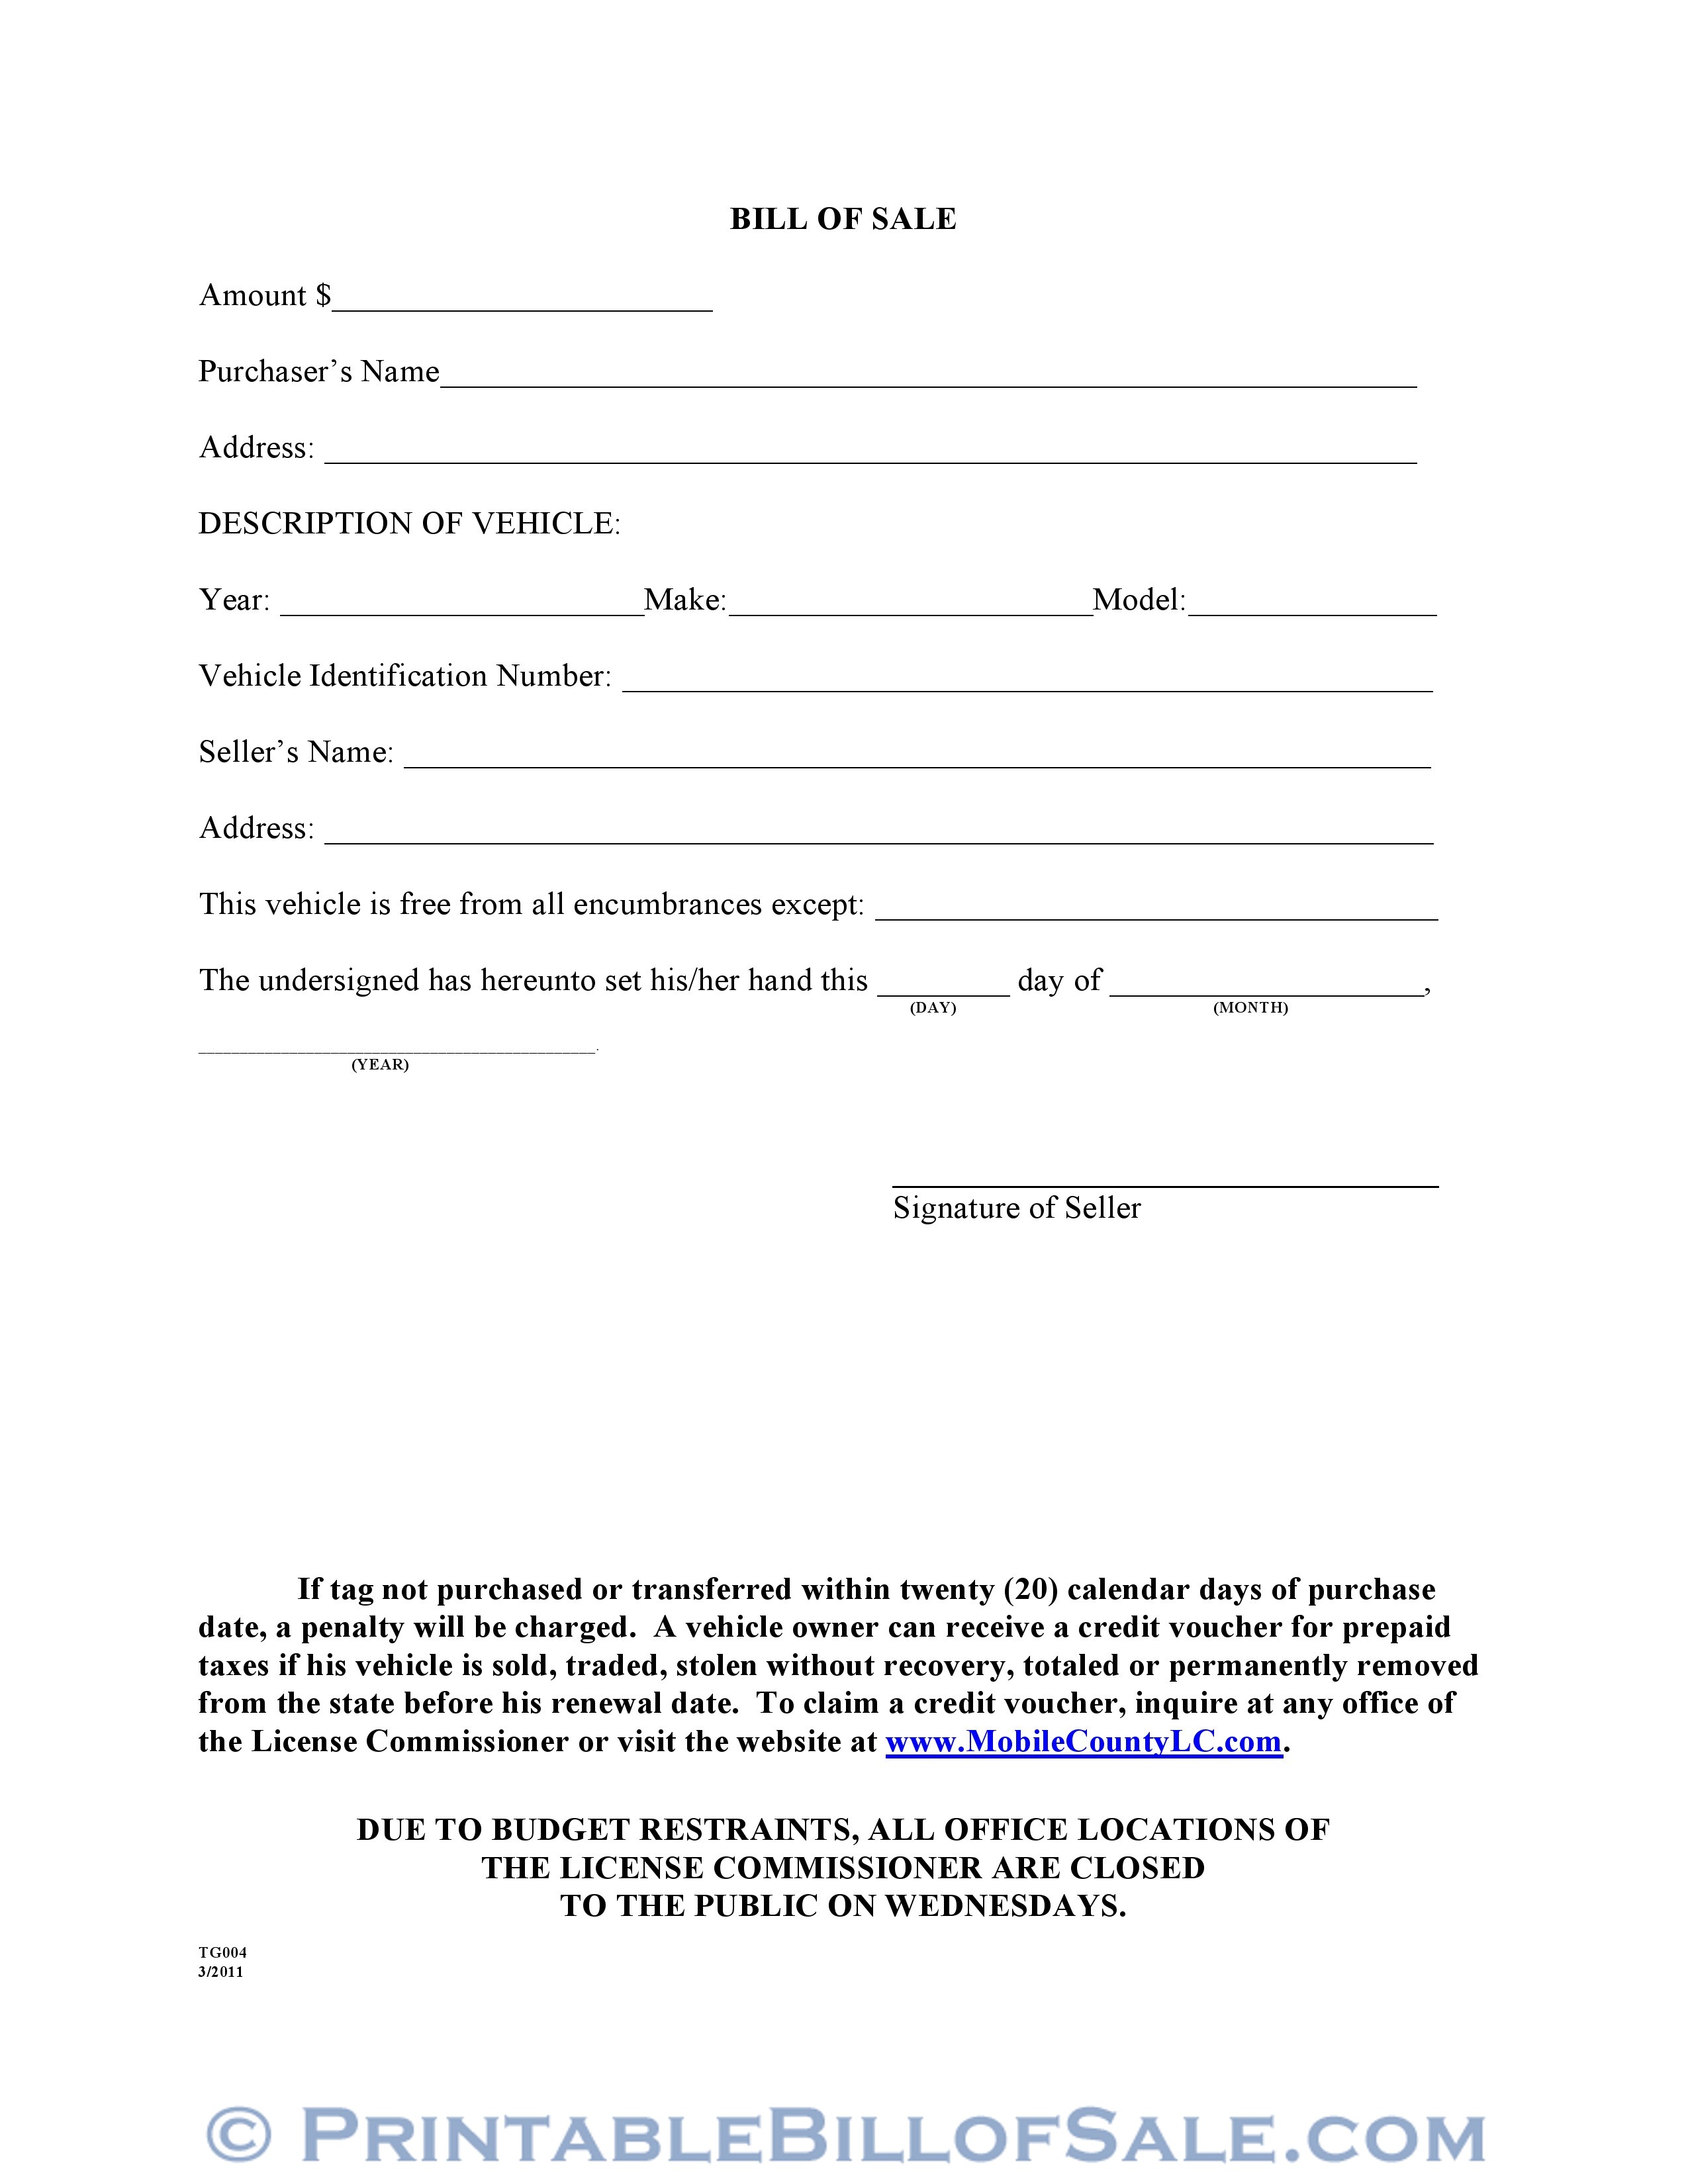 Free Mobile County Alabama Motor Vehicle Bill Of Sale Form Tg004 Download Pdf Word Template